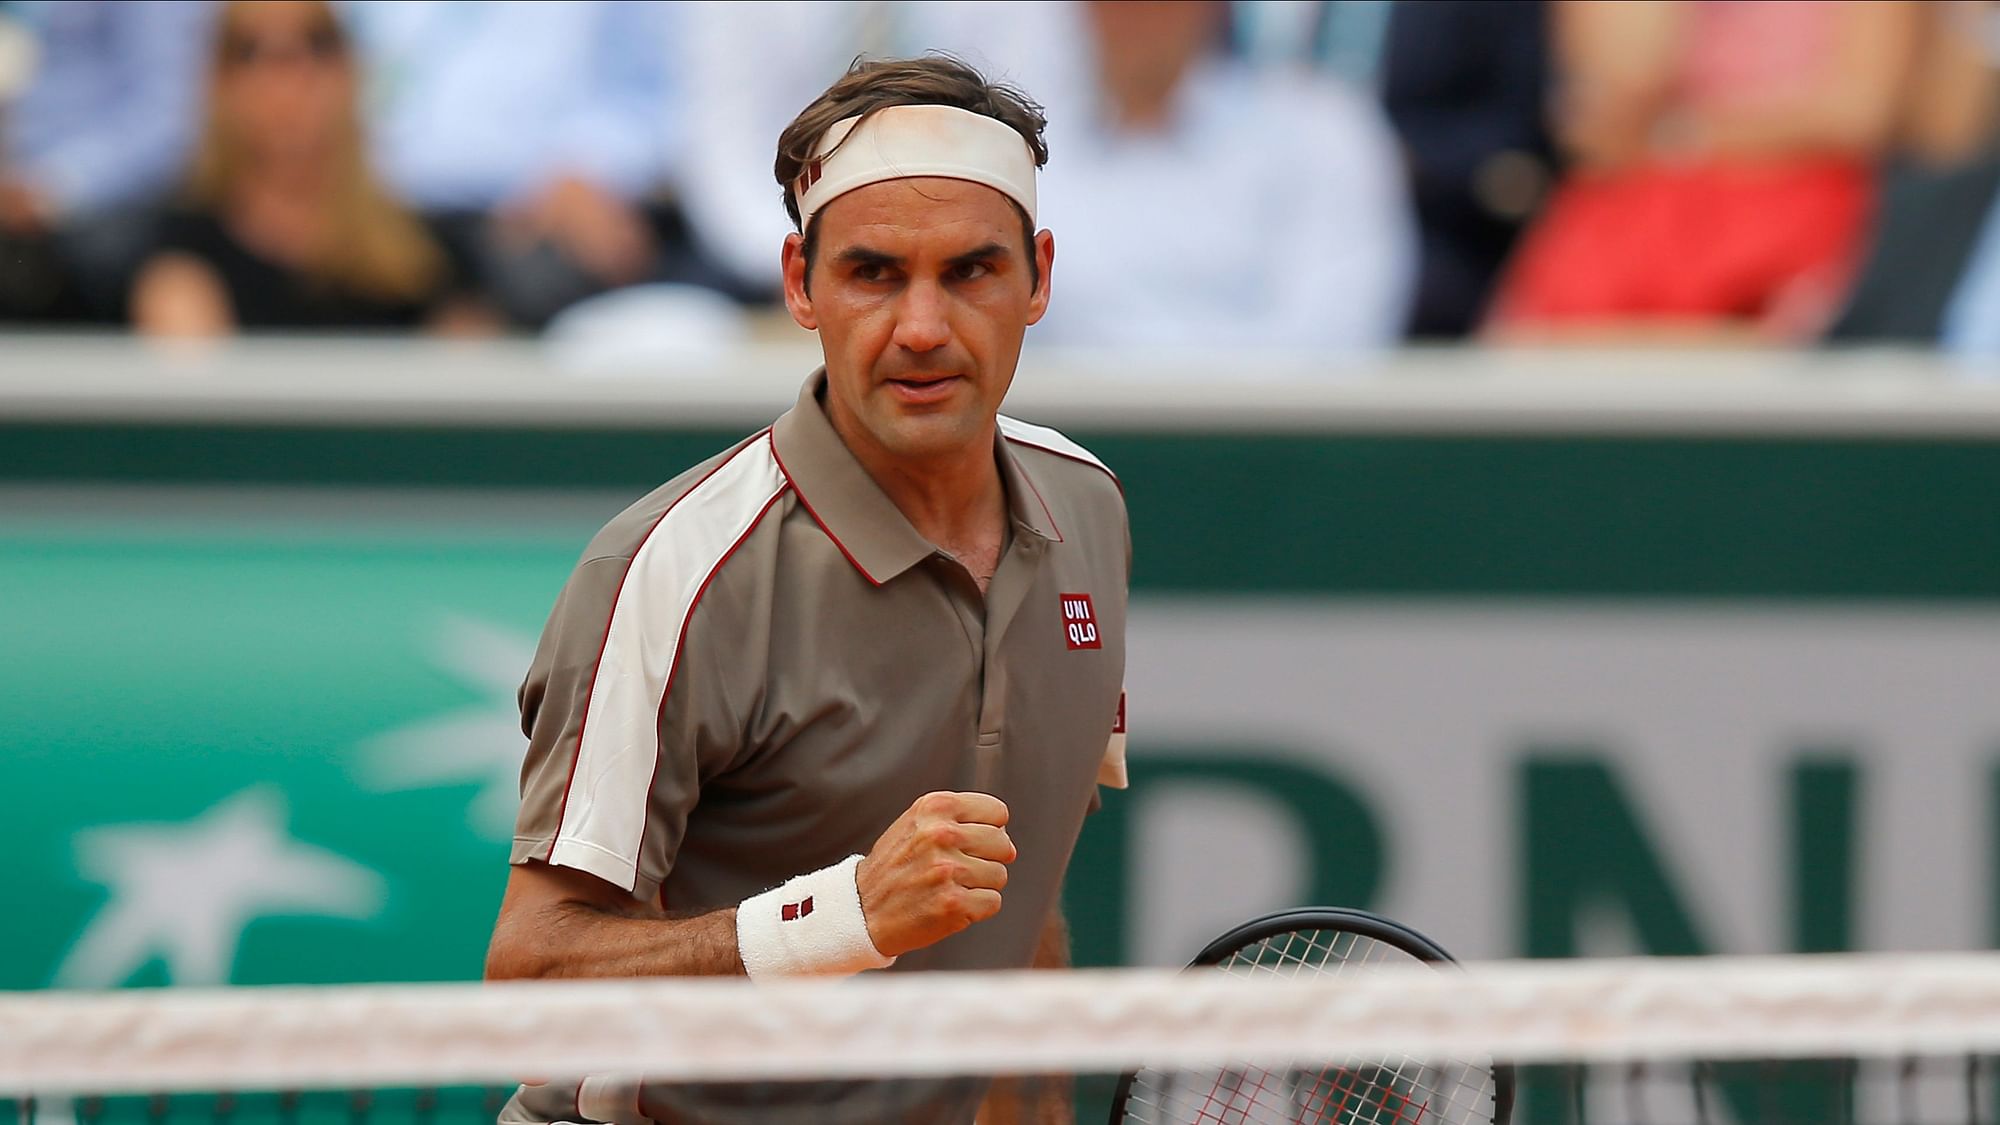 Roger Federer beat Stan Wawrinka to reach the French Open semifinals.